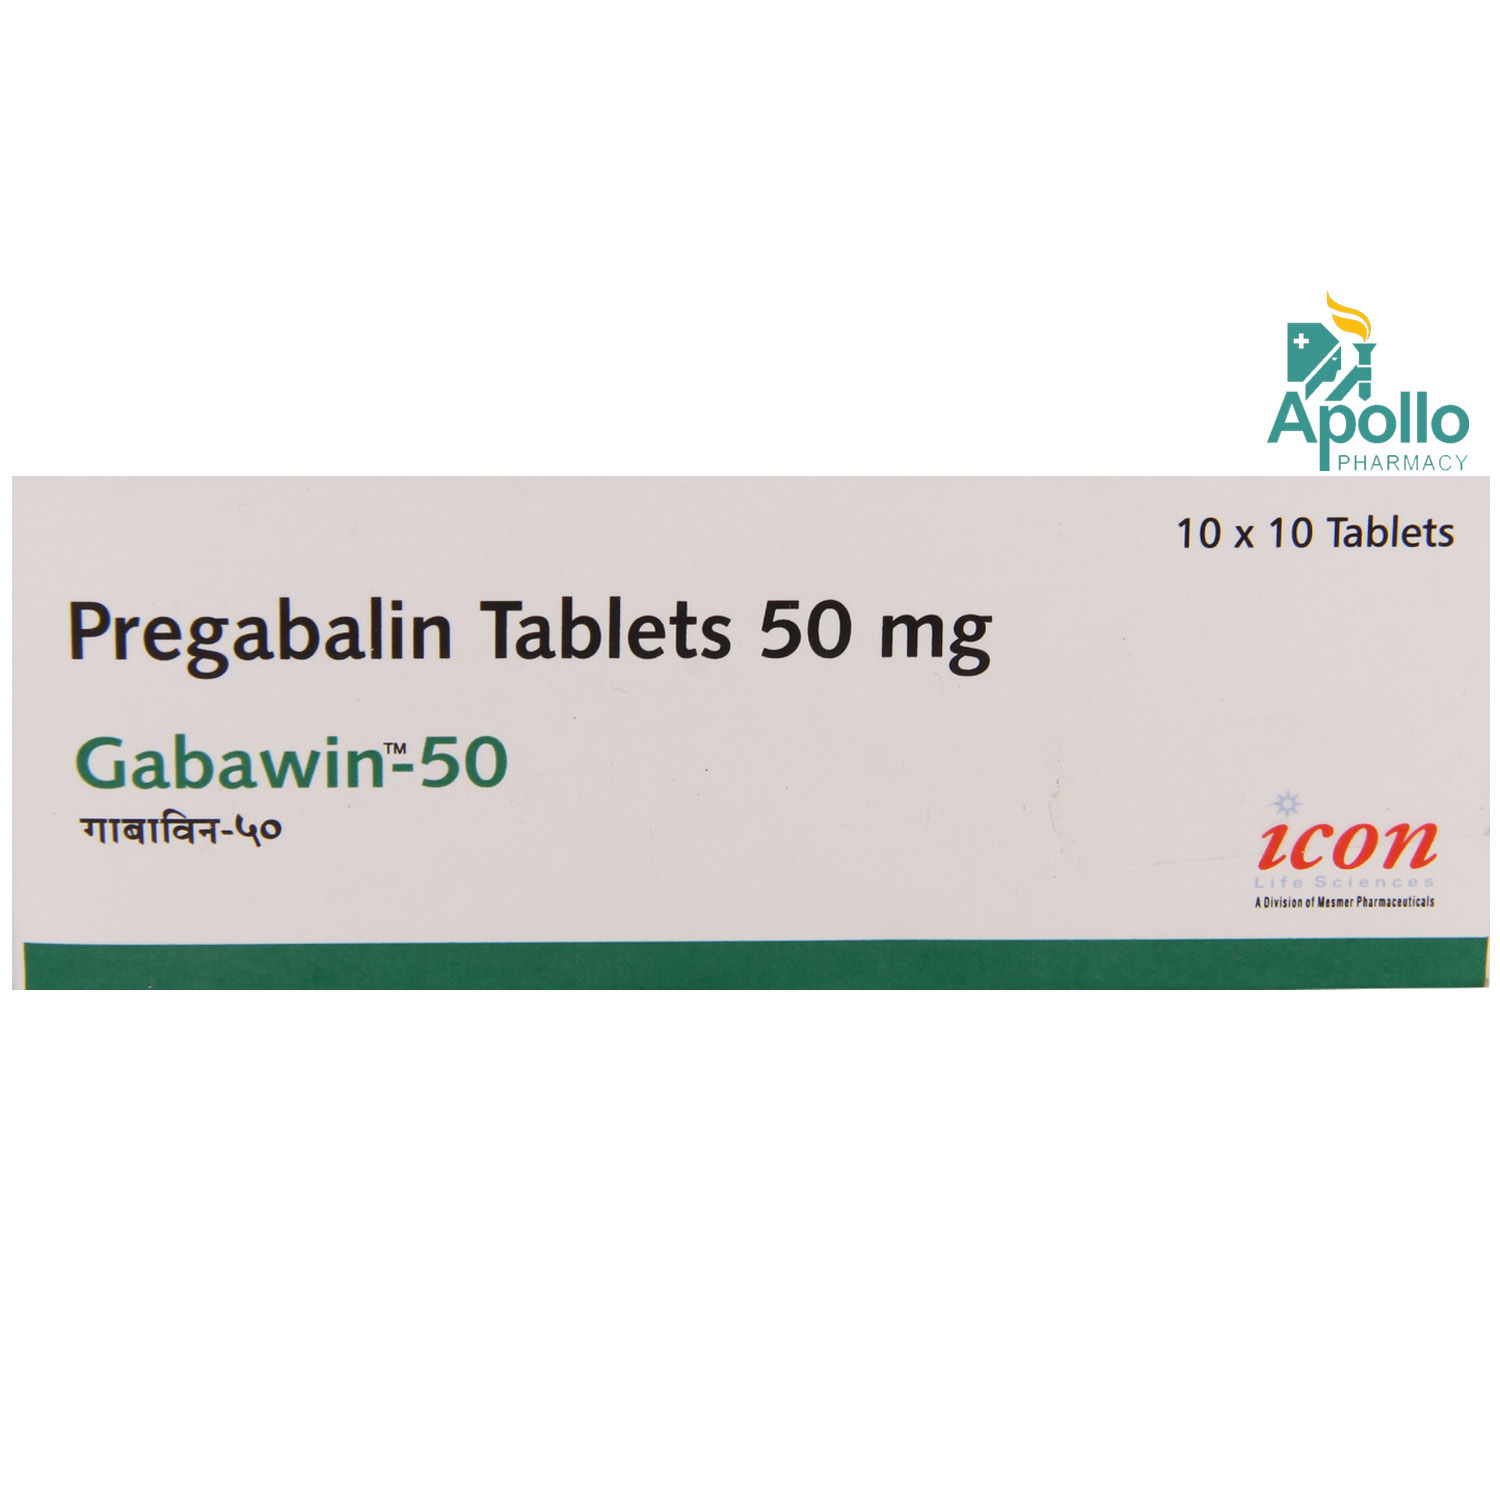 Gabawin-50 Tablet 10's, Pack of 10 TABLETS